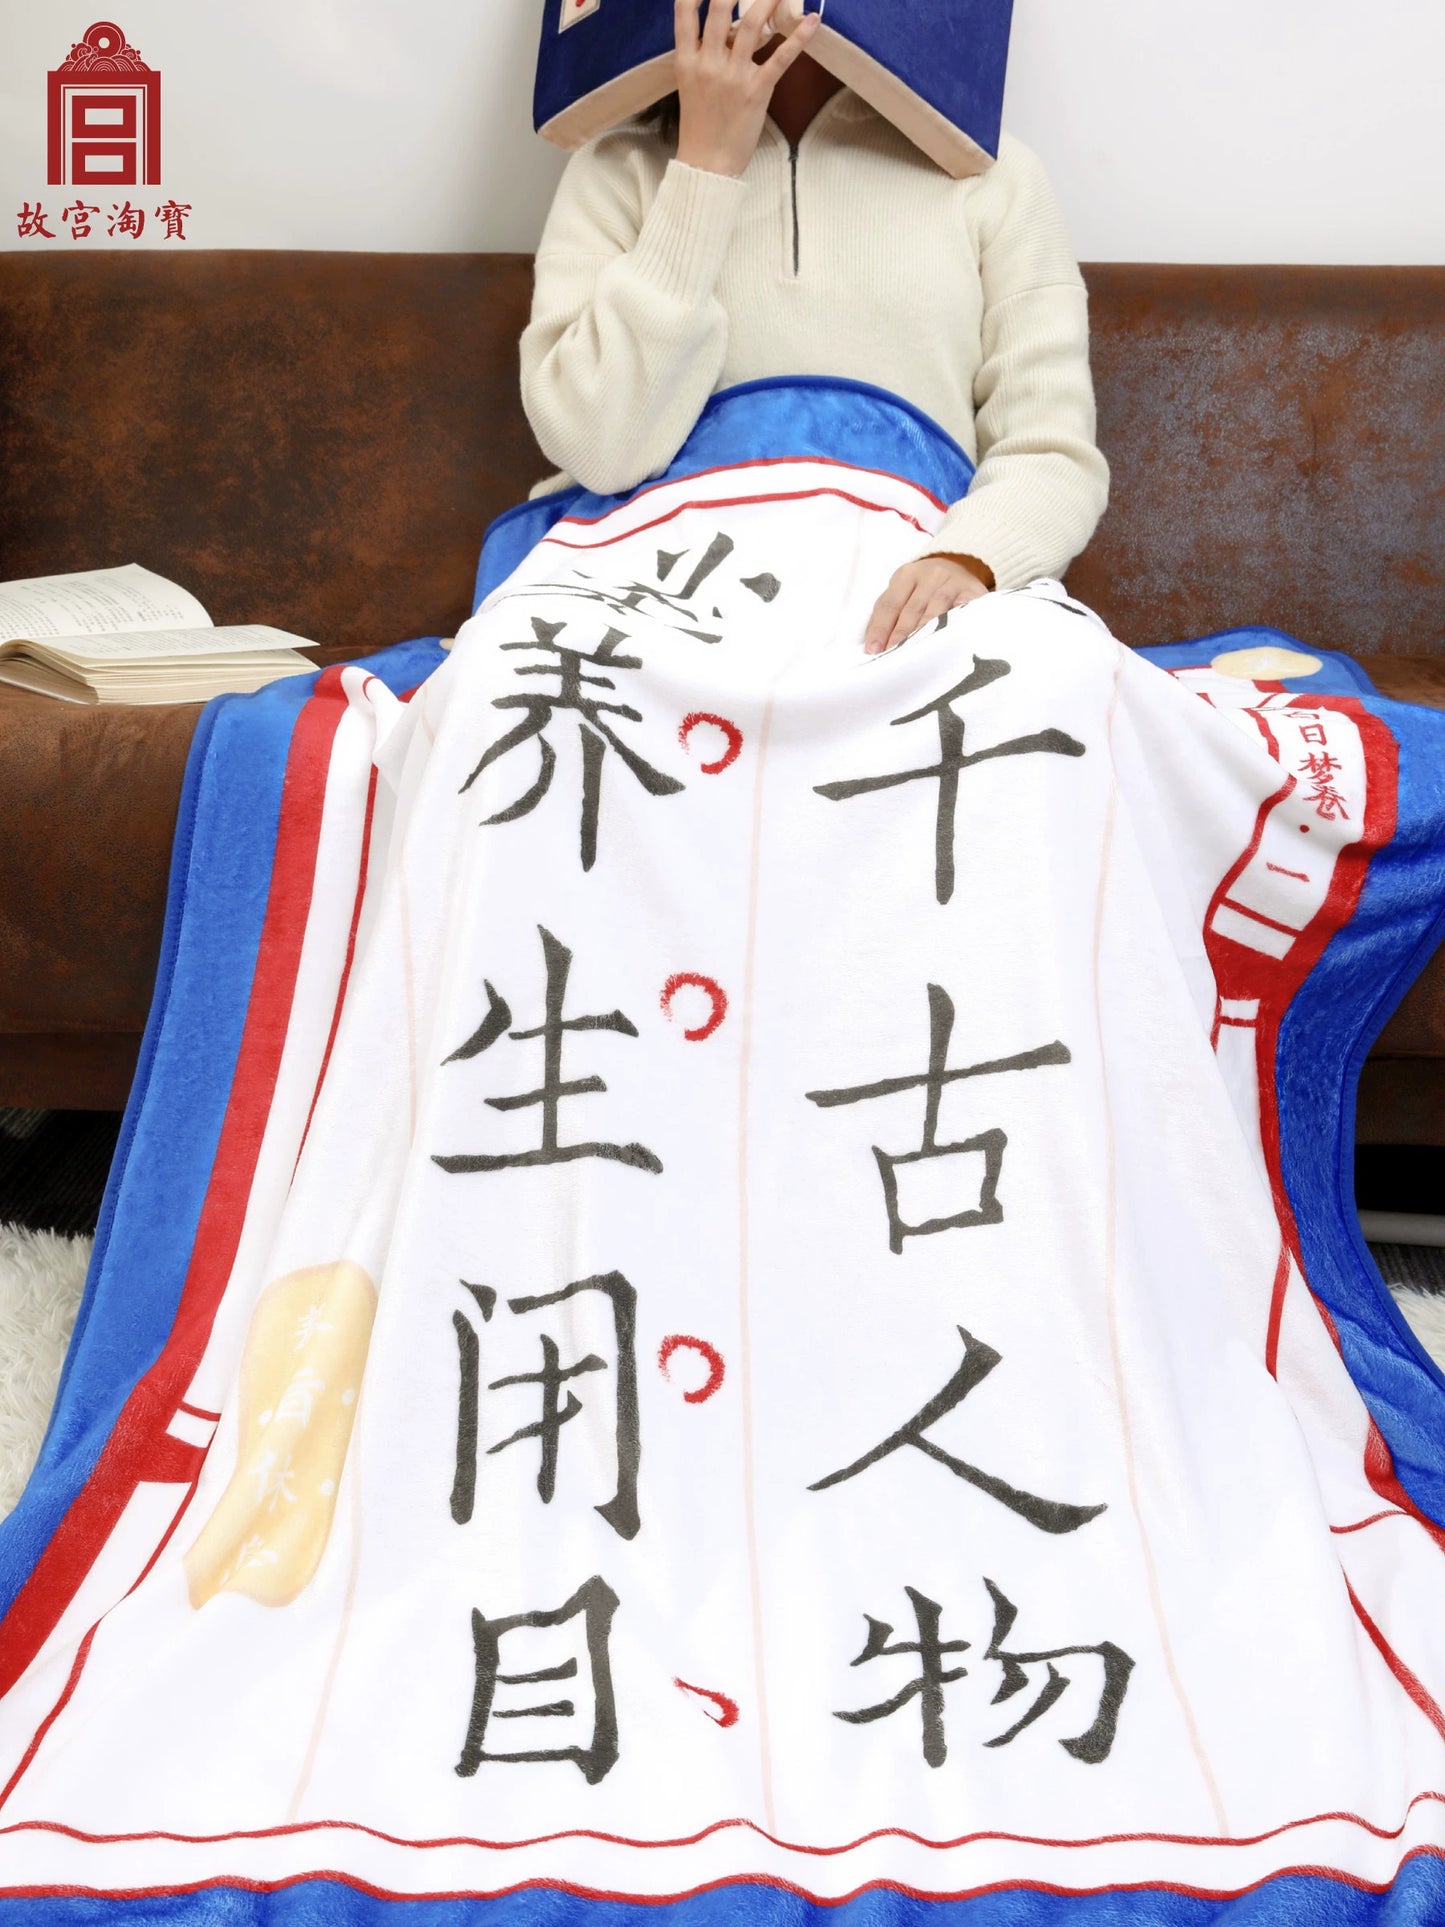 Palace Museum rest blanket office nap blanket air conditioning blanket Wenchuang birthday gift.